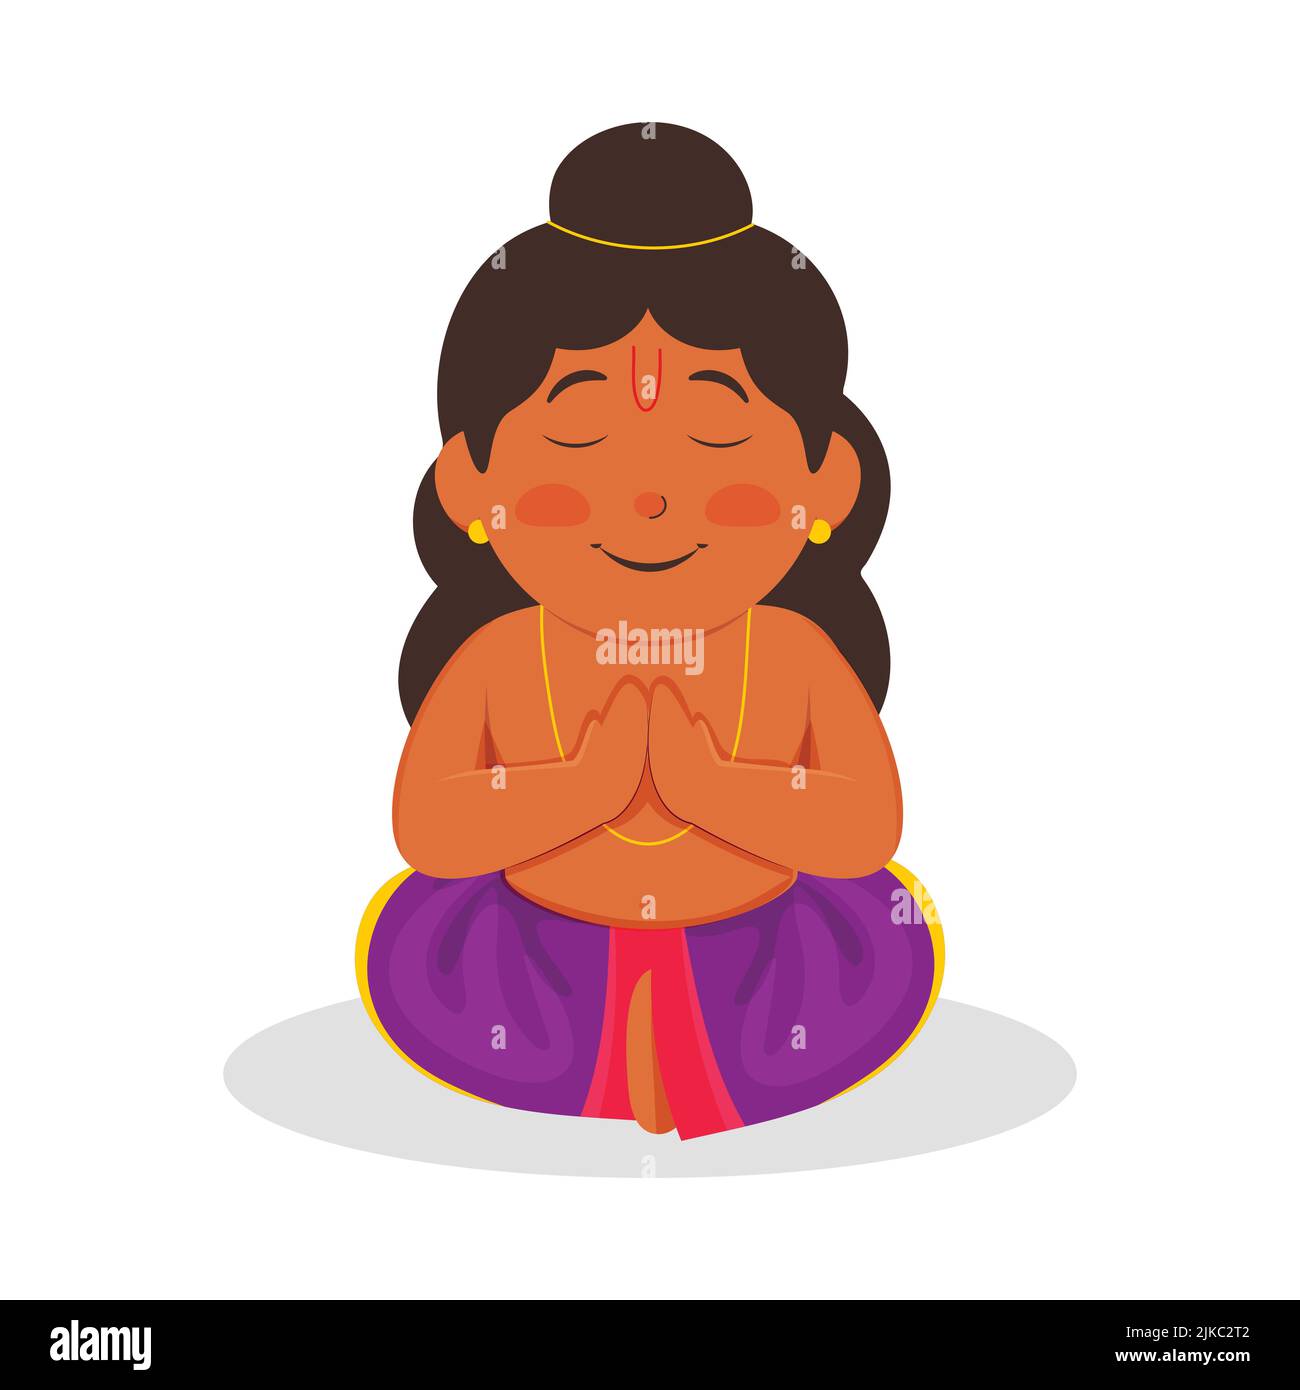 Illustration Of Sadhu Boy Or Prahlad Doing Prayer With Closed Eyes In Sitting Pose. Stock Vector